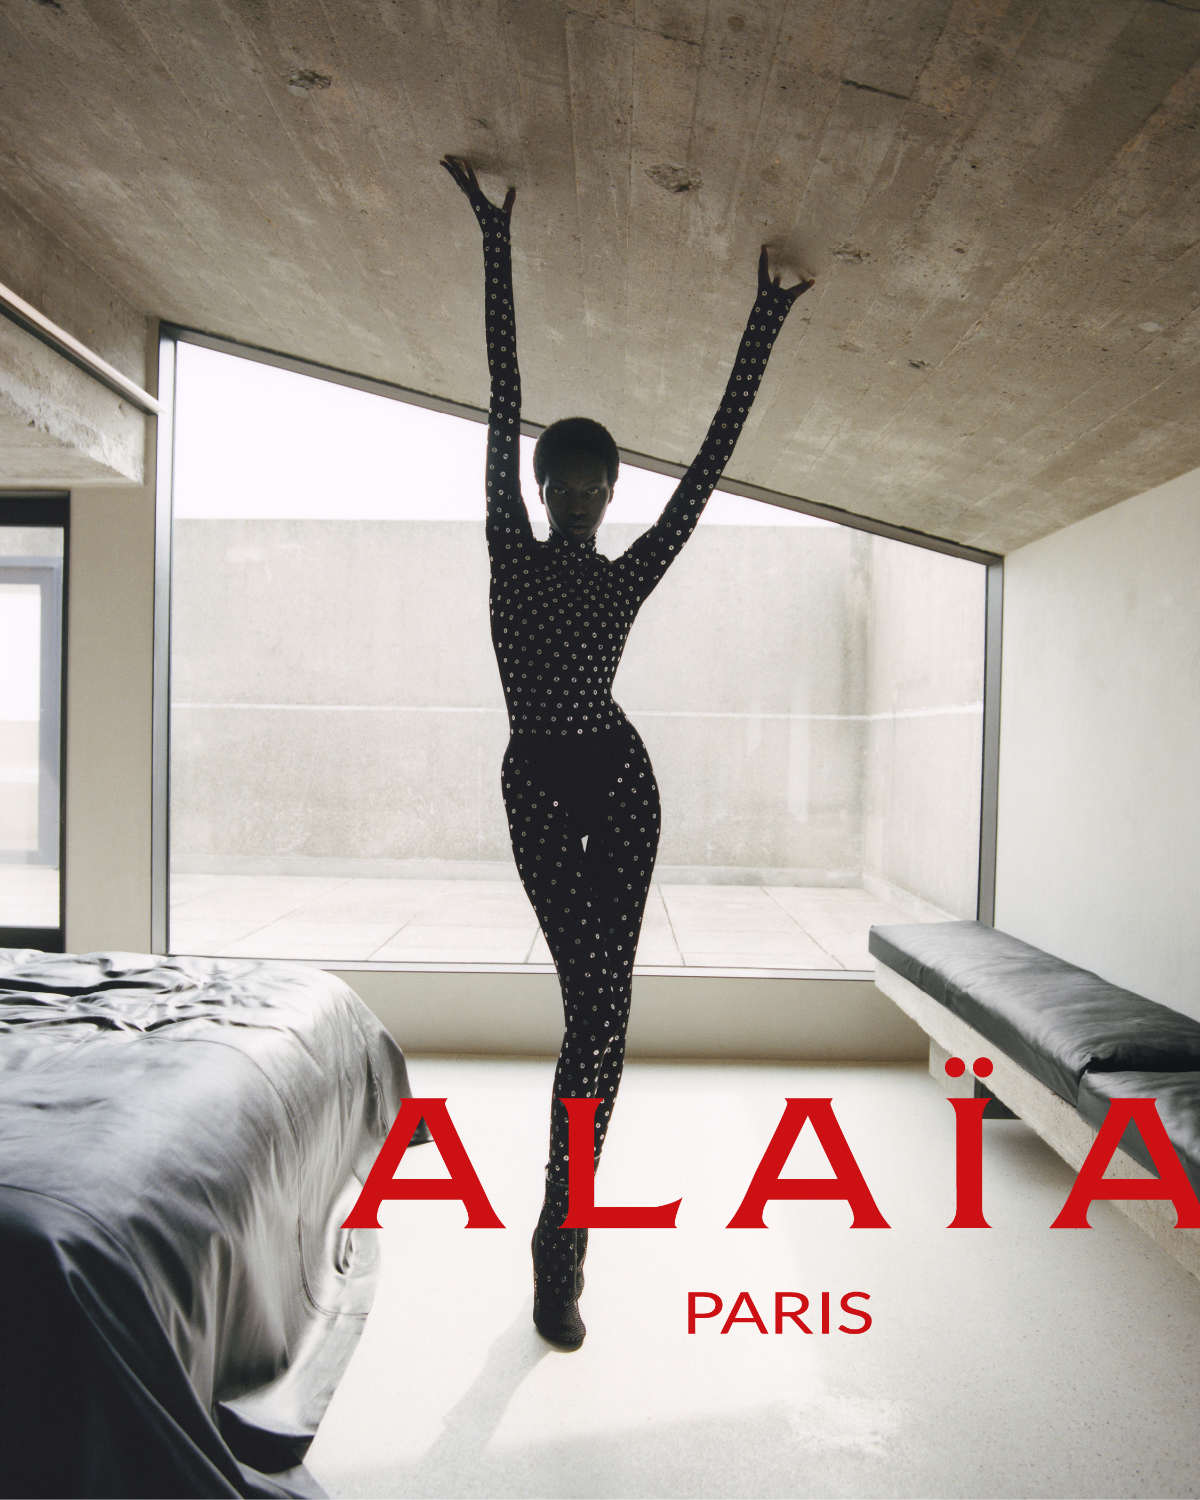 Alaïa Launches Its New Campaign For The Summer Fall 2023 Collection